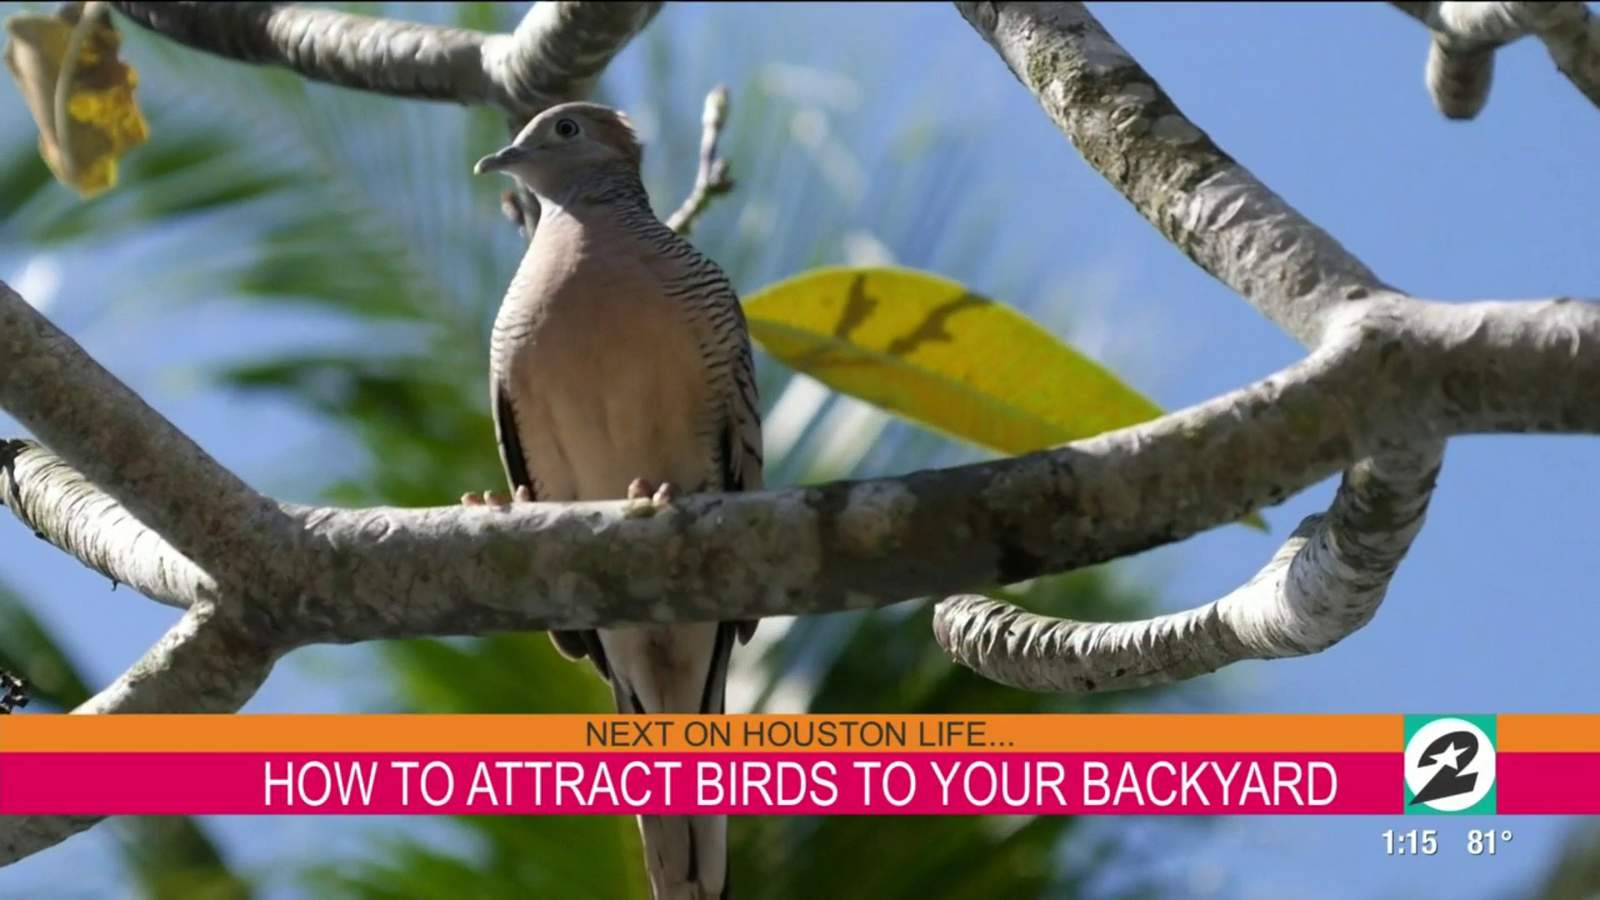 How you can attract birds to your backyard in the Houston area